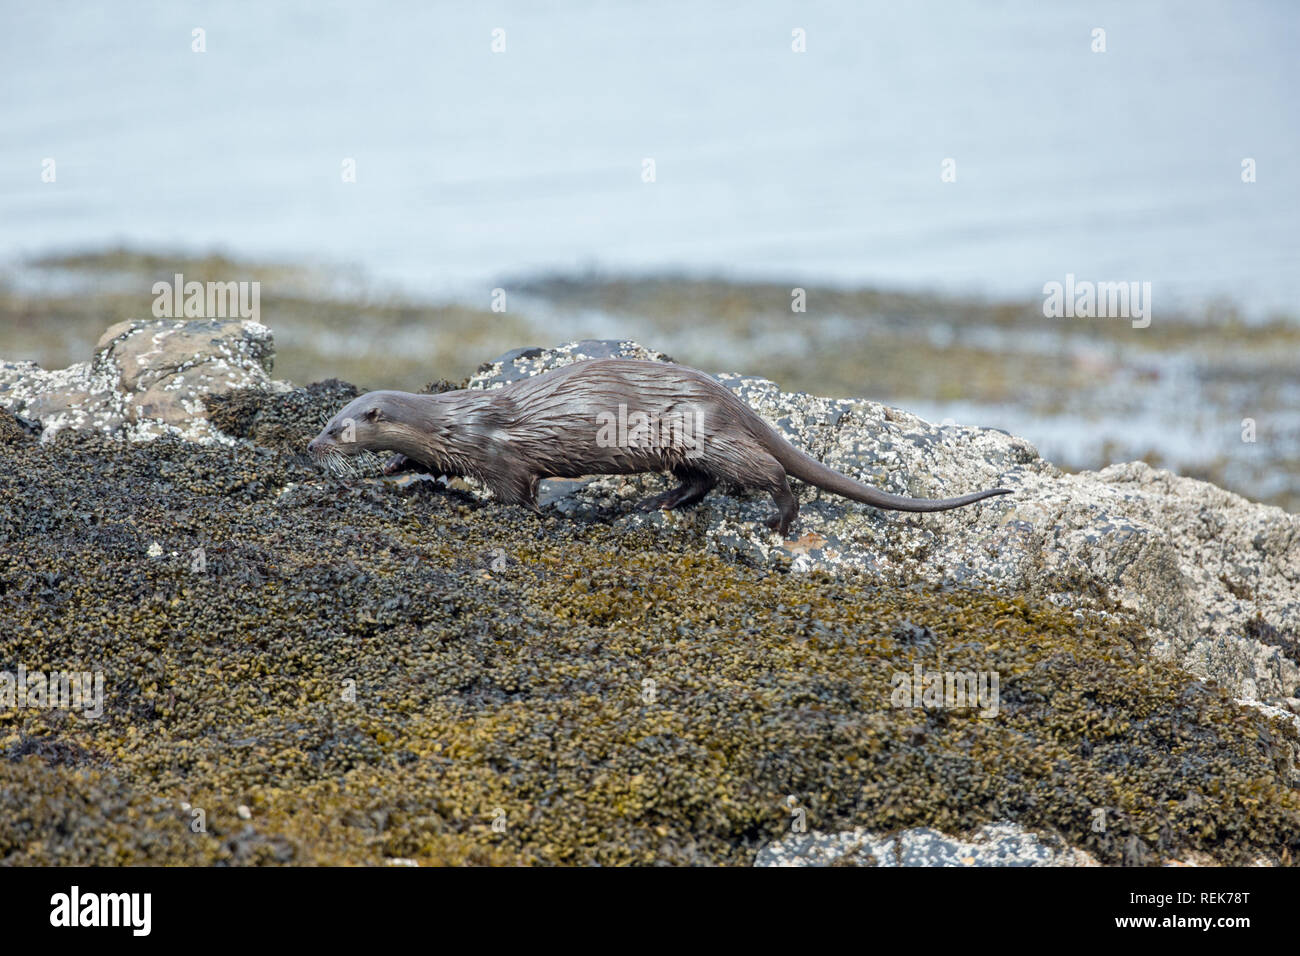 Otter (Lutra lutra). Pelage fur, coming to “V” pointed ended groups, aiding the shedding of water.  Moving over Bladder Wrack brown seaweed and Acorn Barnacles. Stock Photo